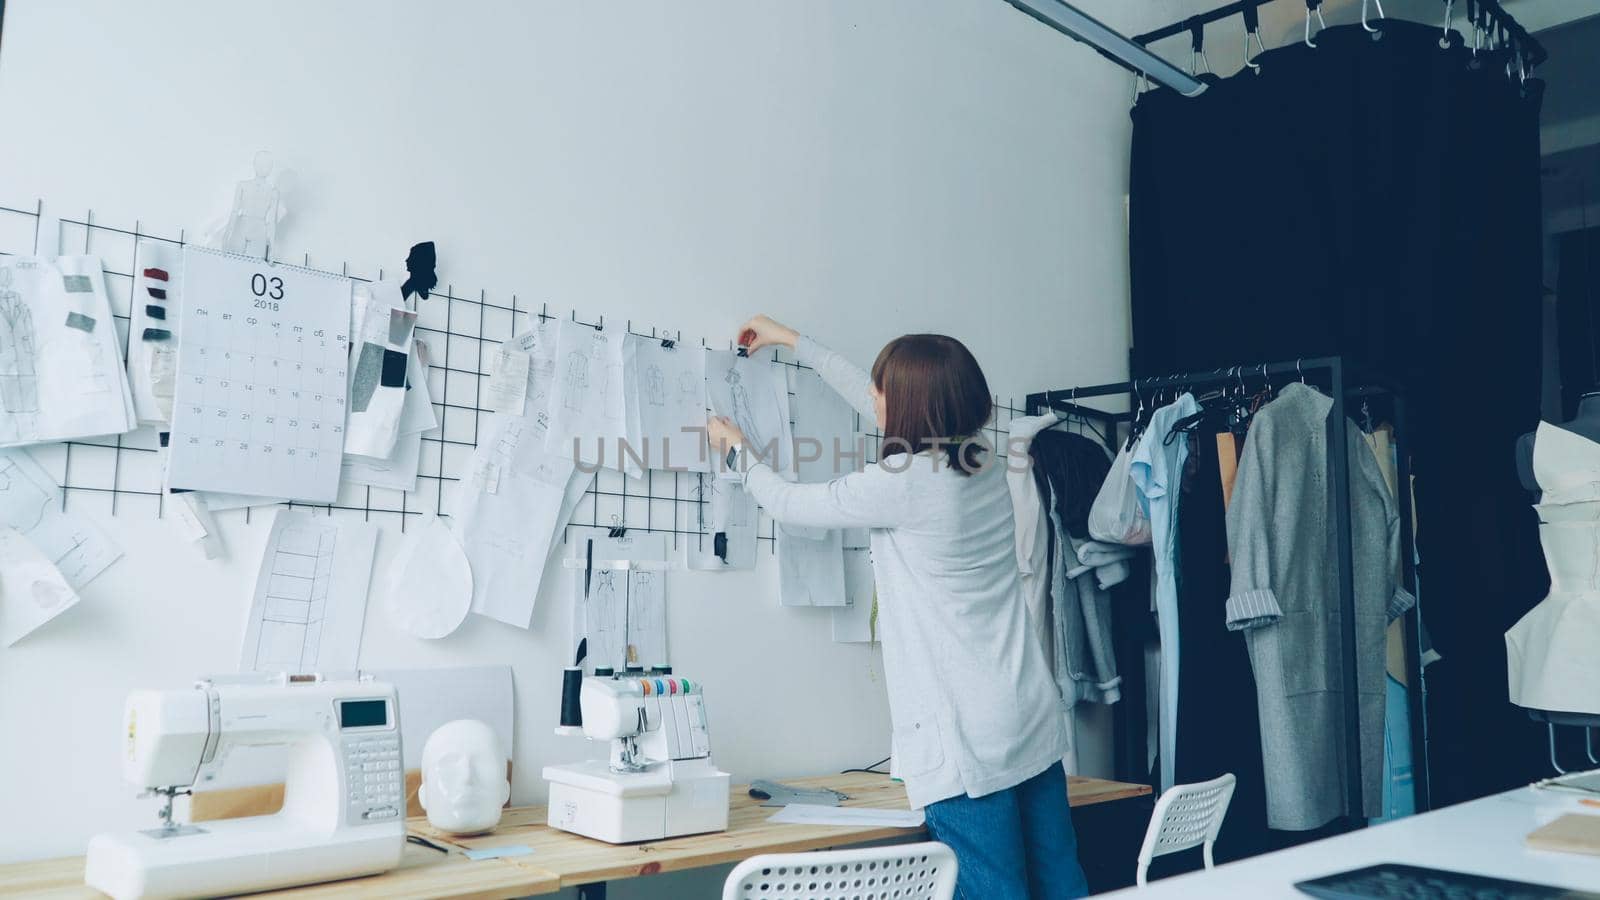 Female clothing designer is taking sketches from studio table and putting them on wall with other drawings of trendy women's garments. Creative thinking concept.